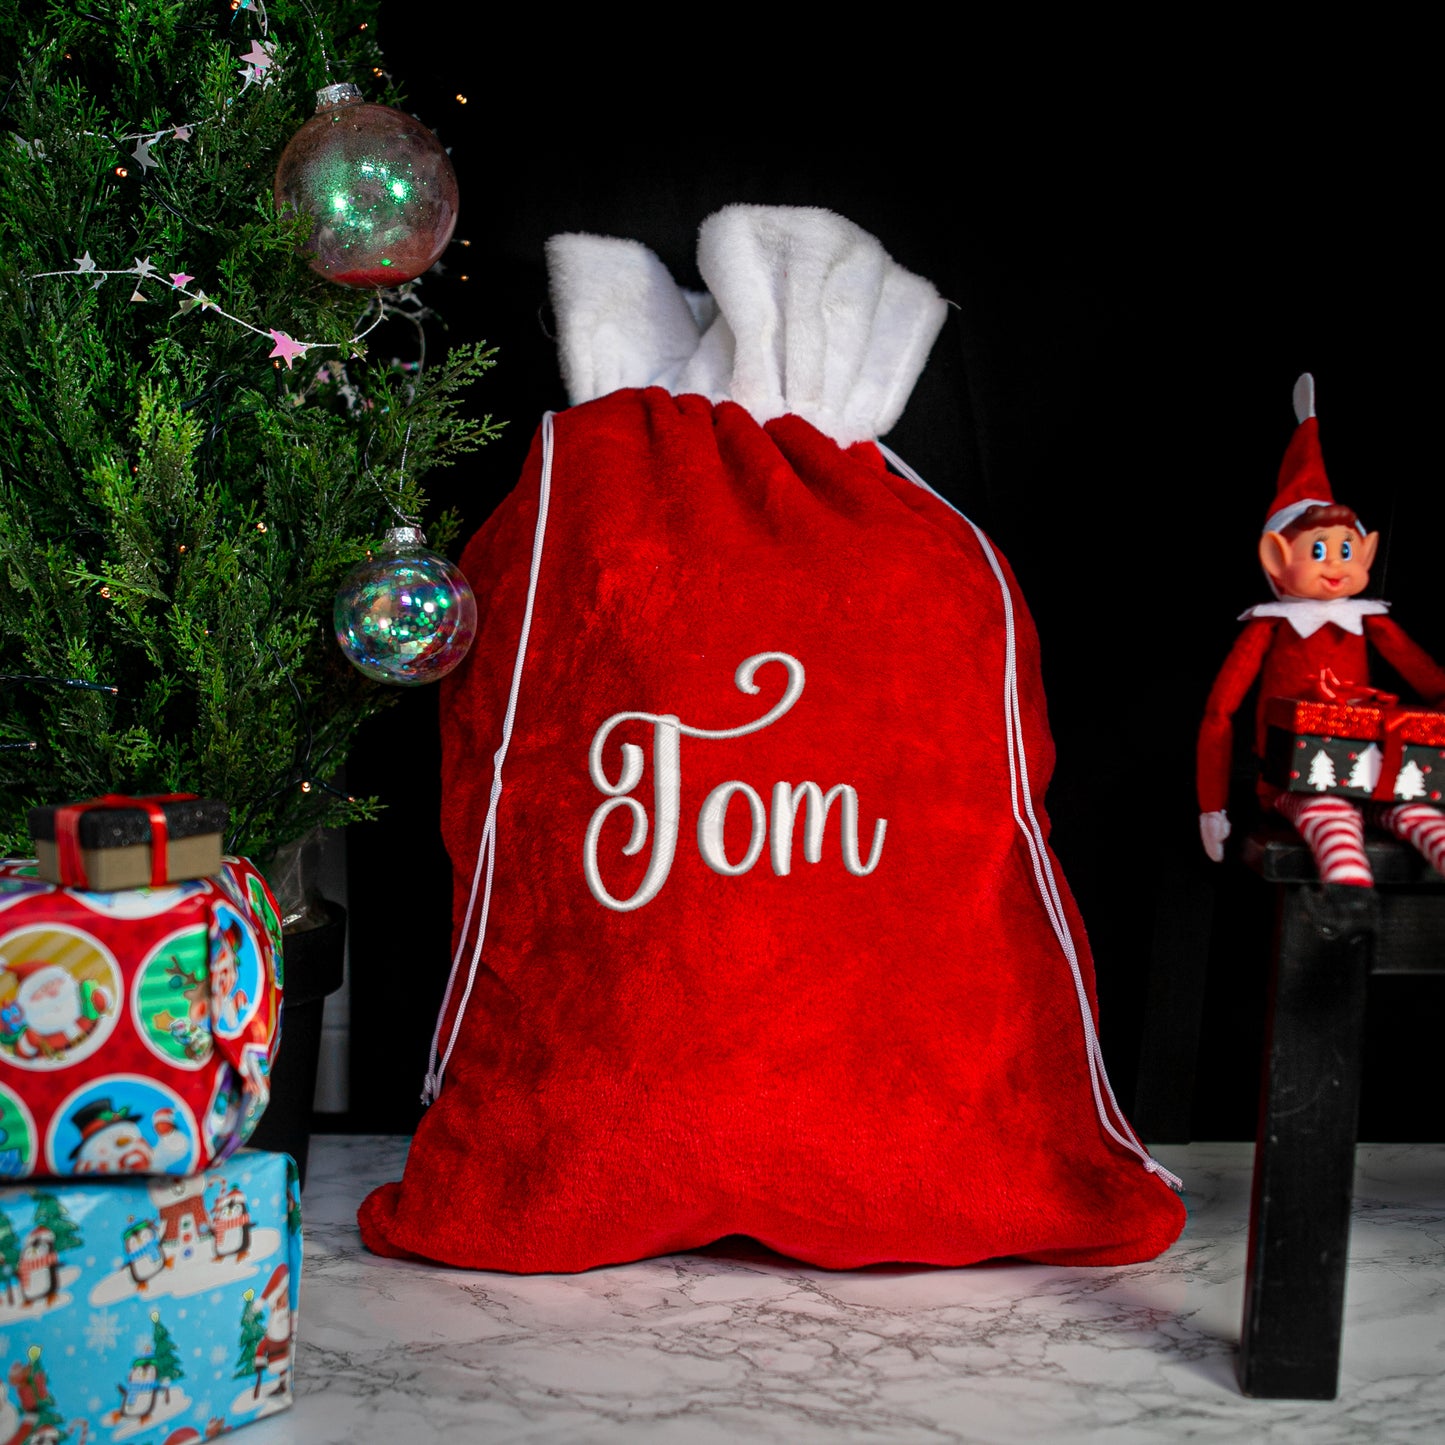 Personalised Christmas Plush Red Santa Sack and/or Stocking Embroidered Name Gift Set  - Always Looking Good -   